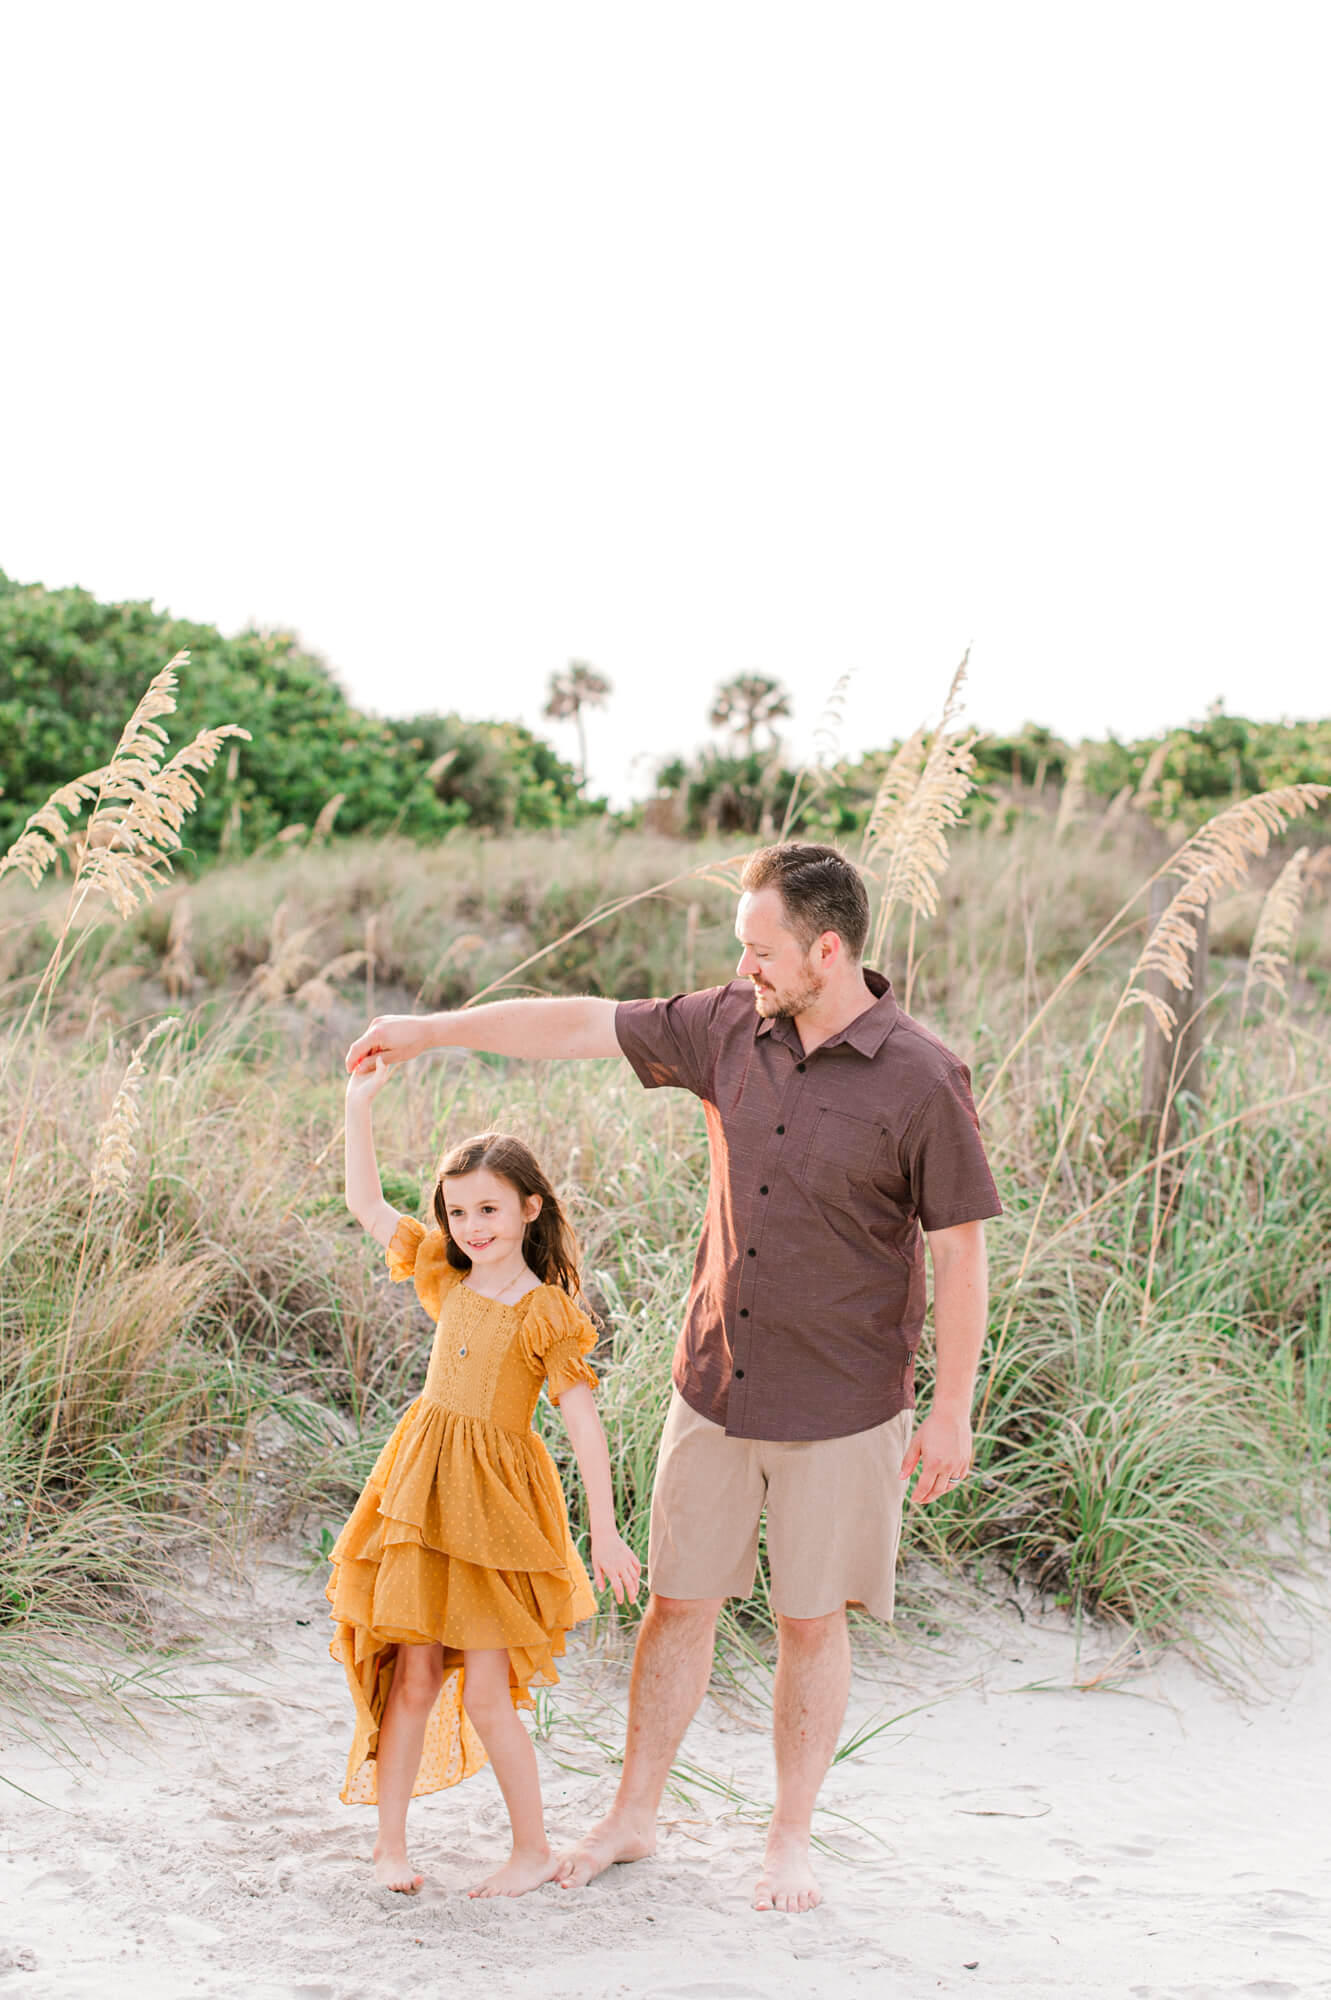 Dad dancing with his daughter on the beach near the dunes things to do in Orlando with kids